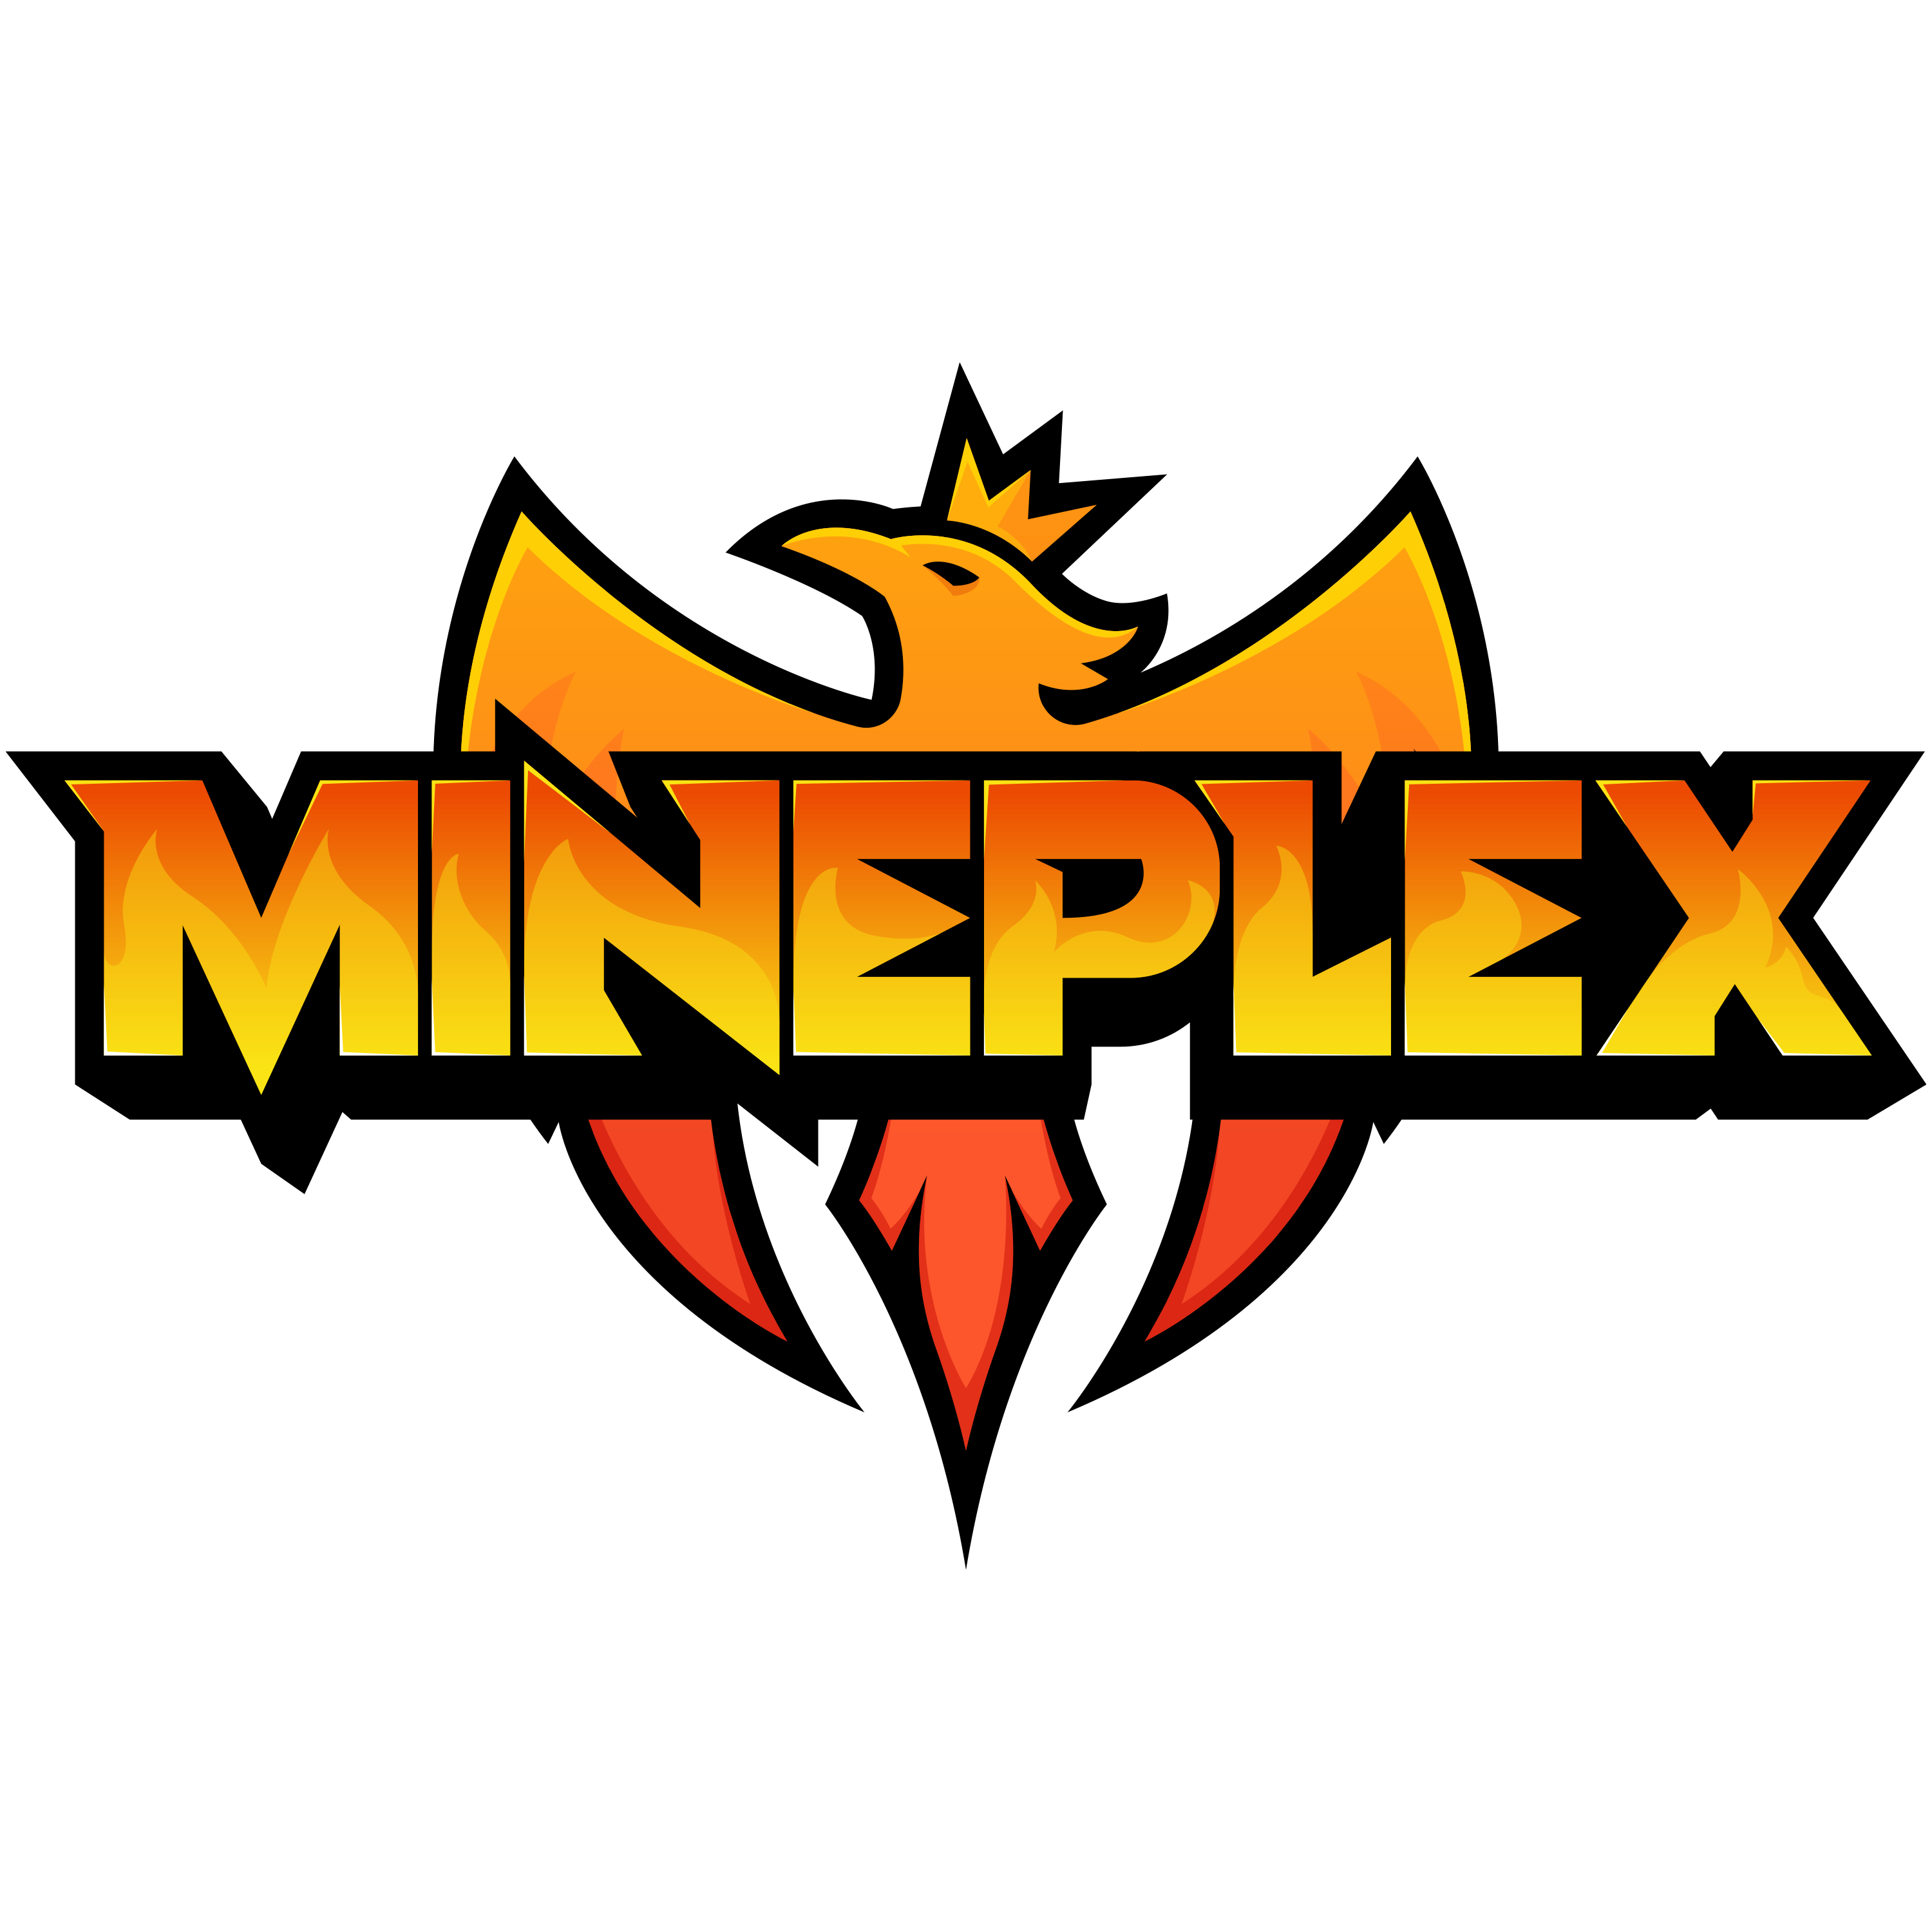 Mineplex, Former Top Minecraft Server, Pivots After Sudden Closure and Acquisition to Launch the Mineplex Studio, a Suite of Tools to Build Online Games